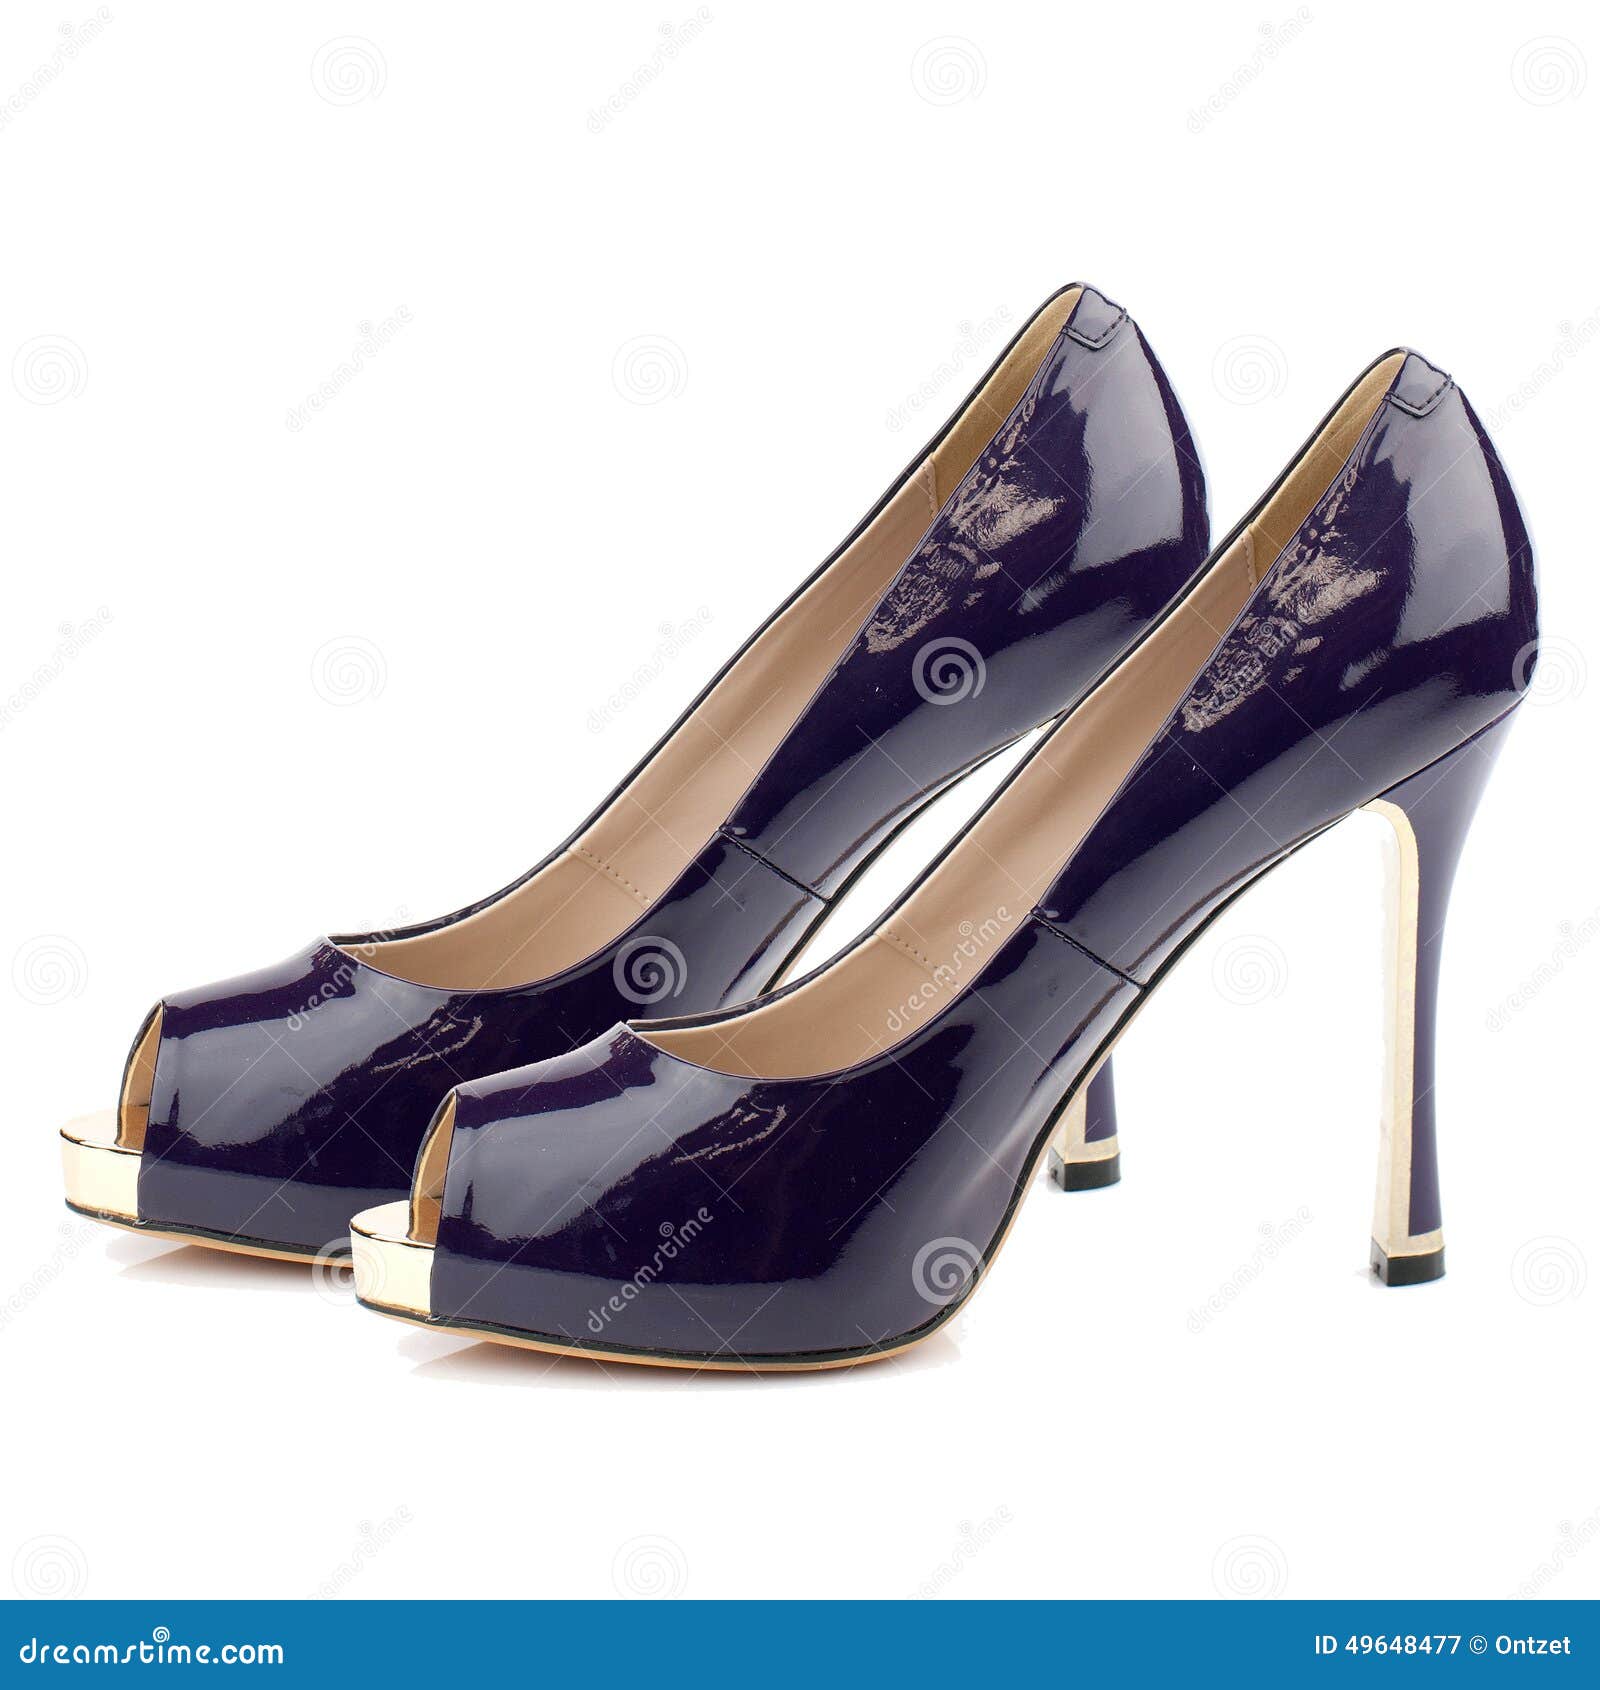 Dark Blue High Heel Shoes Isolated on White Background. Stock Image ...